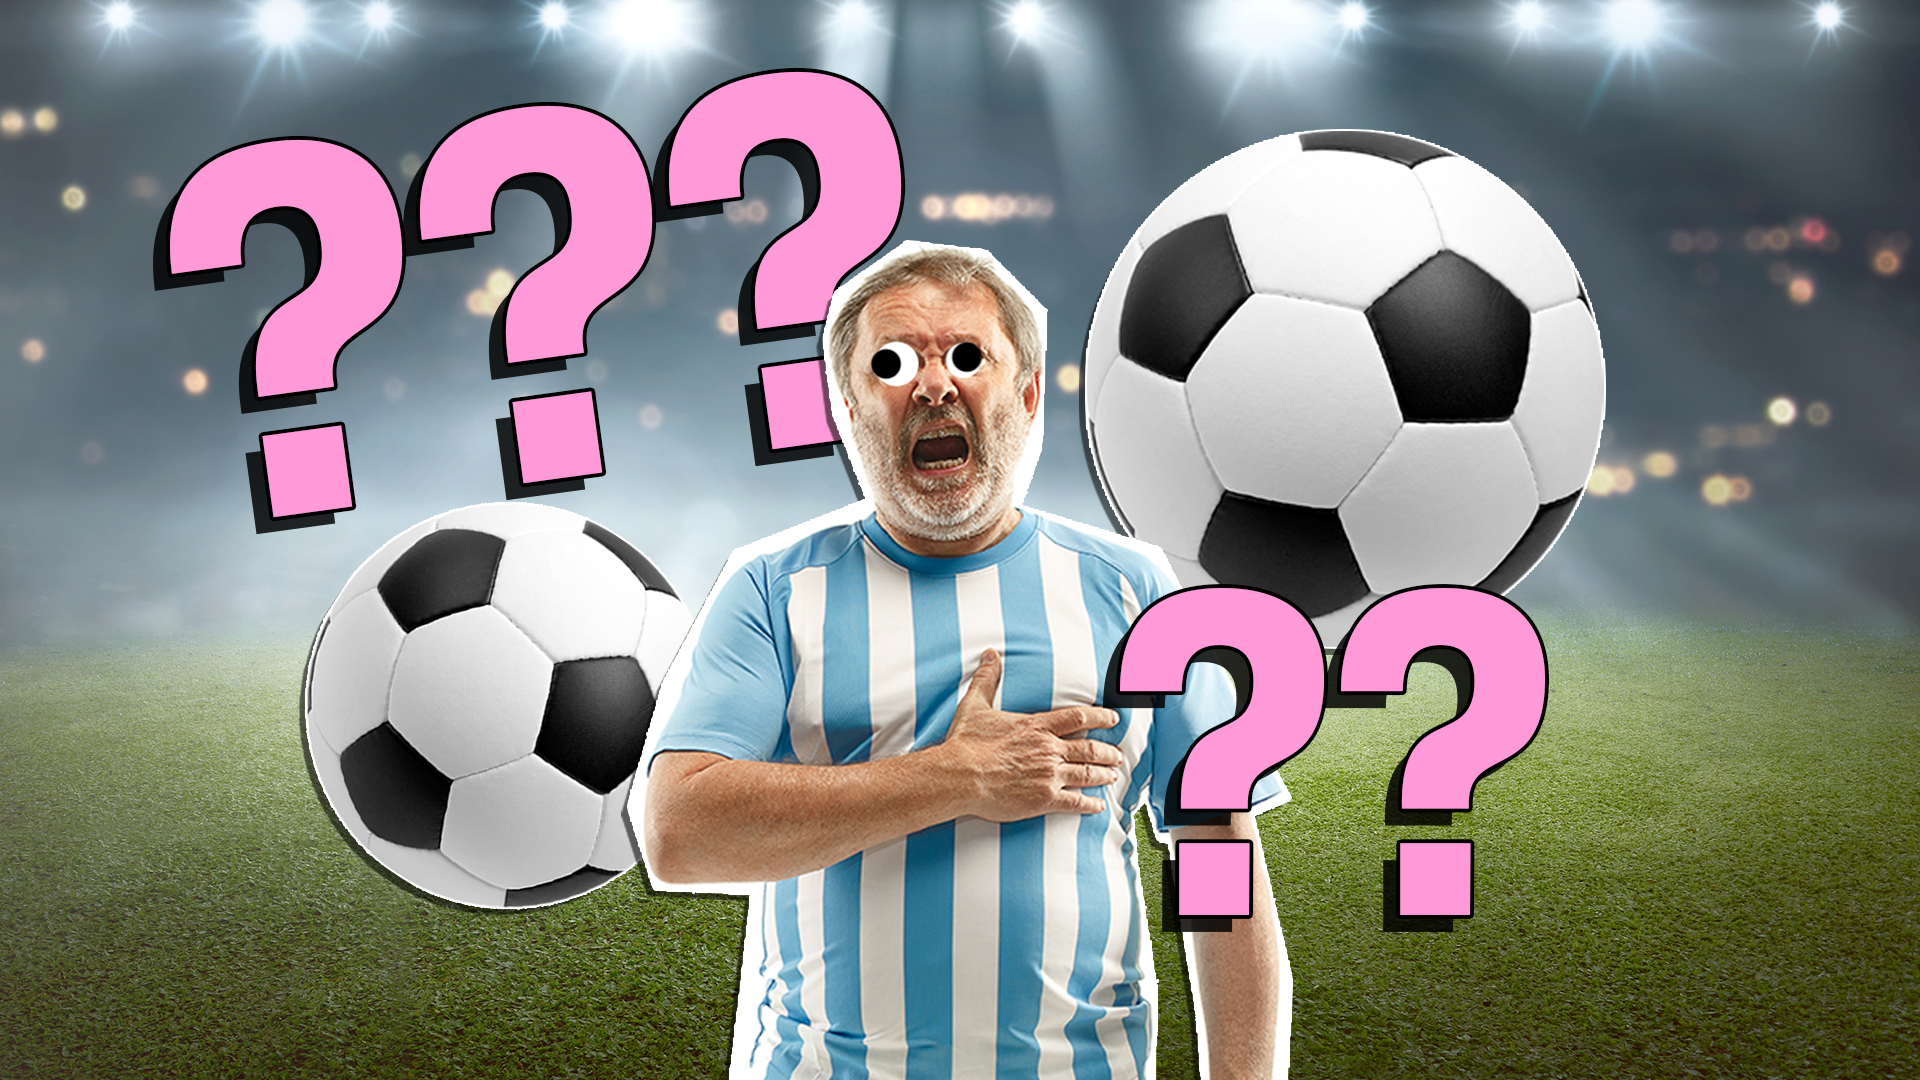 Guess the Football Club a Player Plays For! NO:76 #football